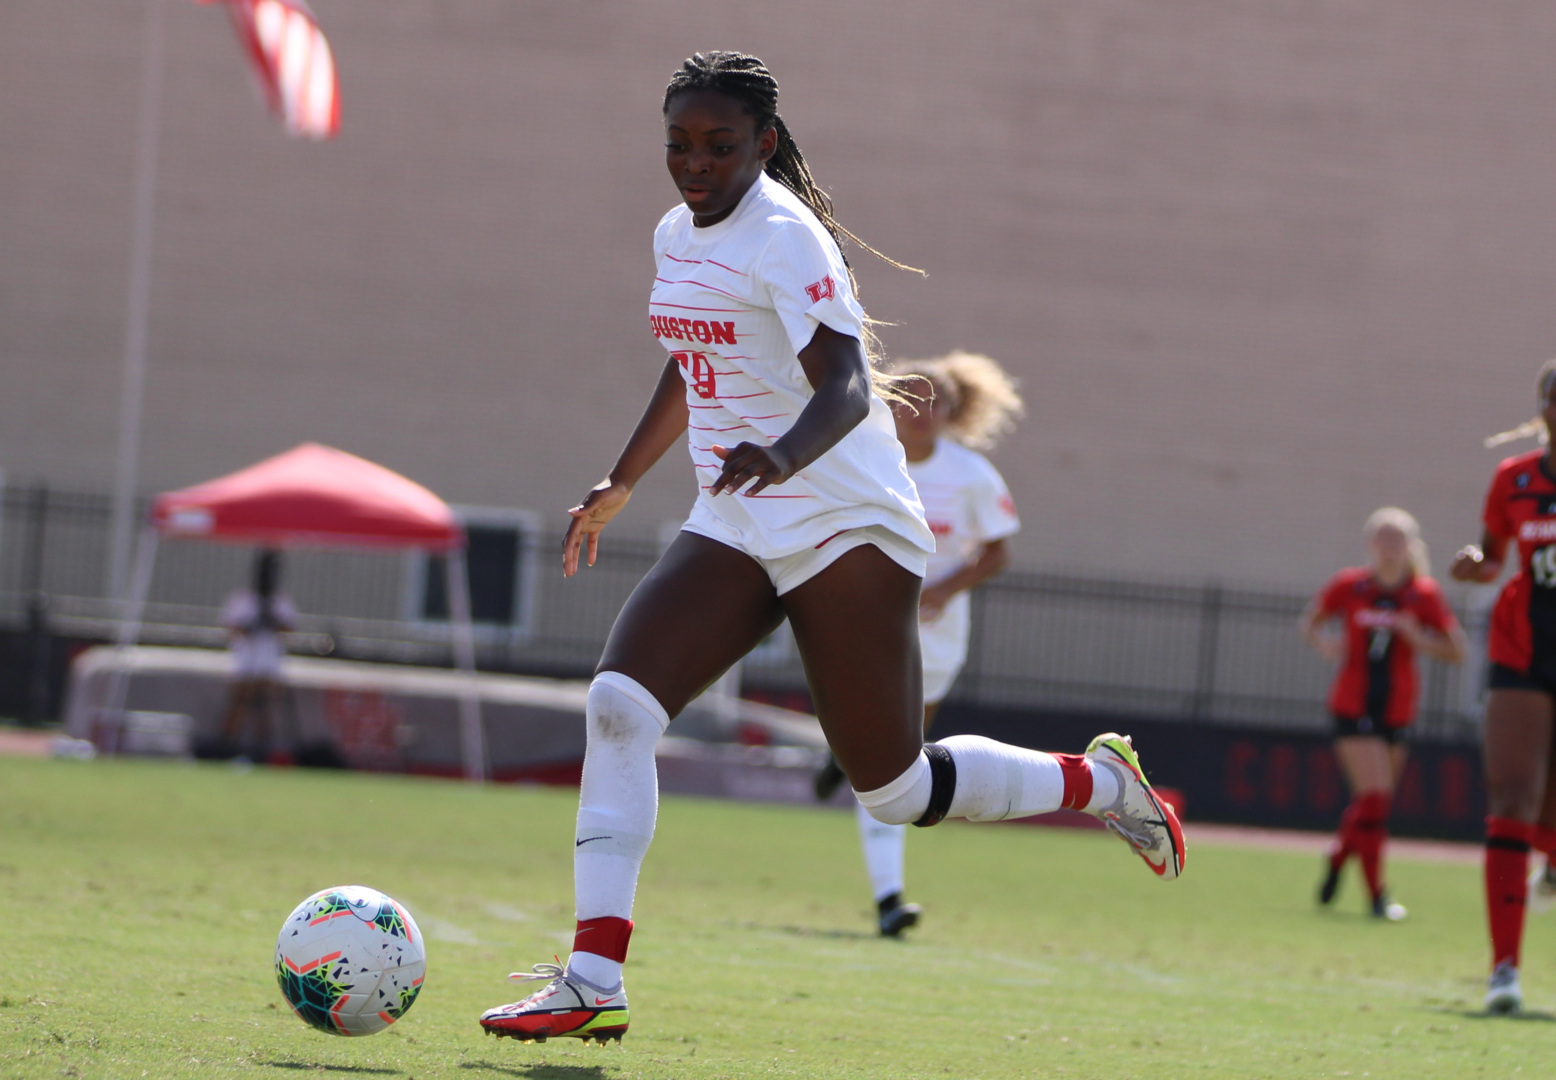 UH soccer defeated Tulsa 2-0 to earn the No. 2 seed in the AAC Tournament. | Sean Thomas/The Cougar